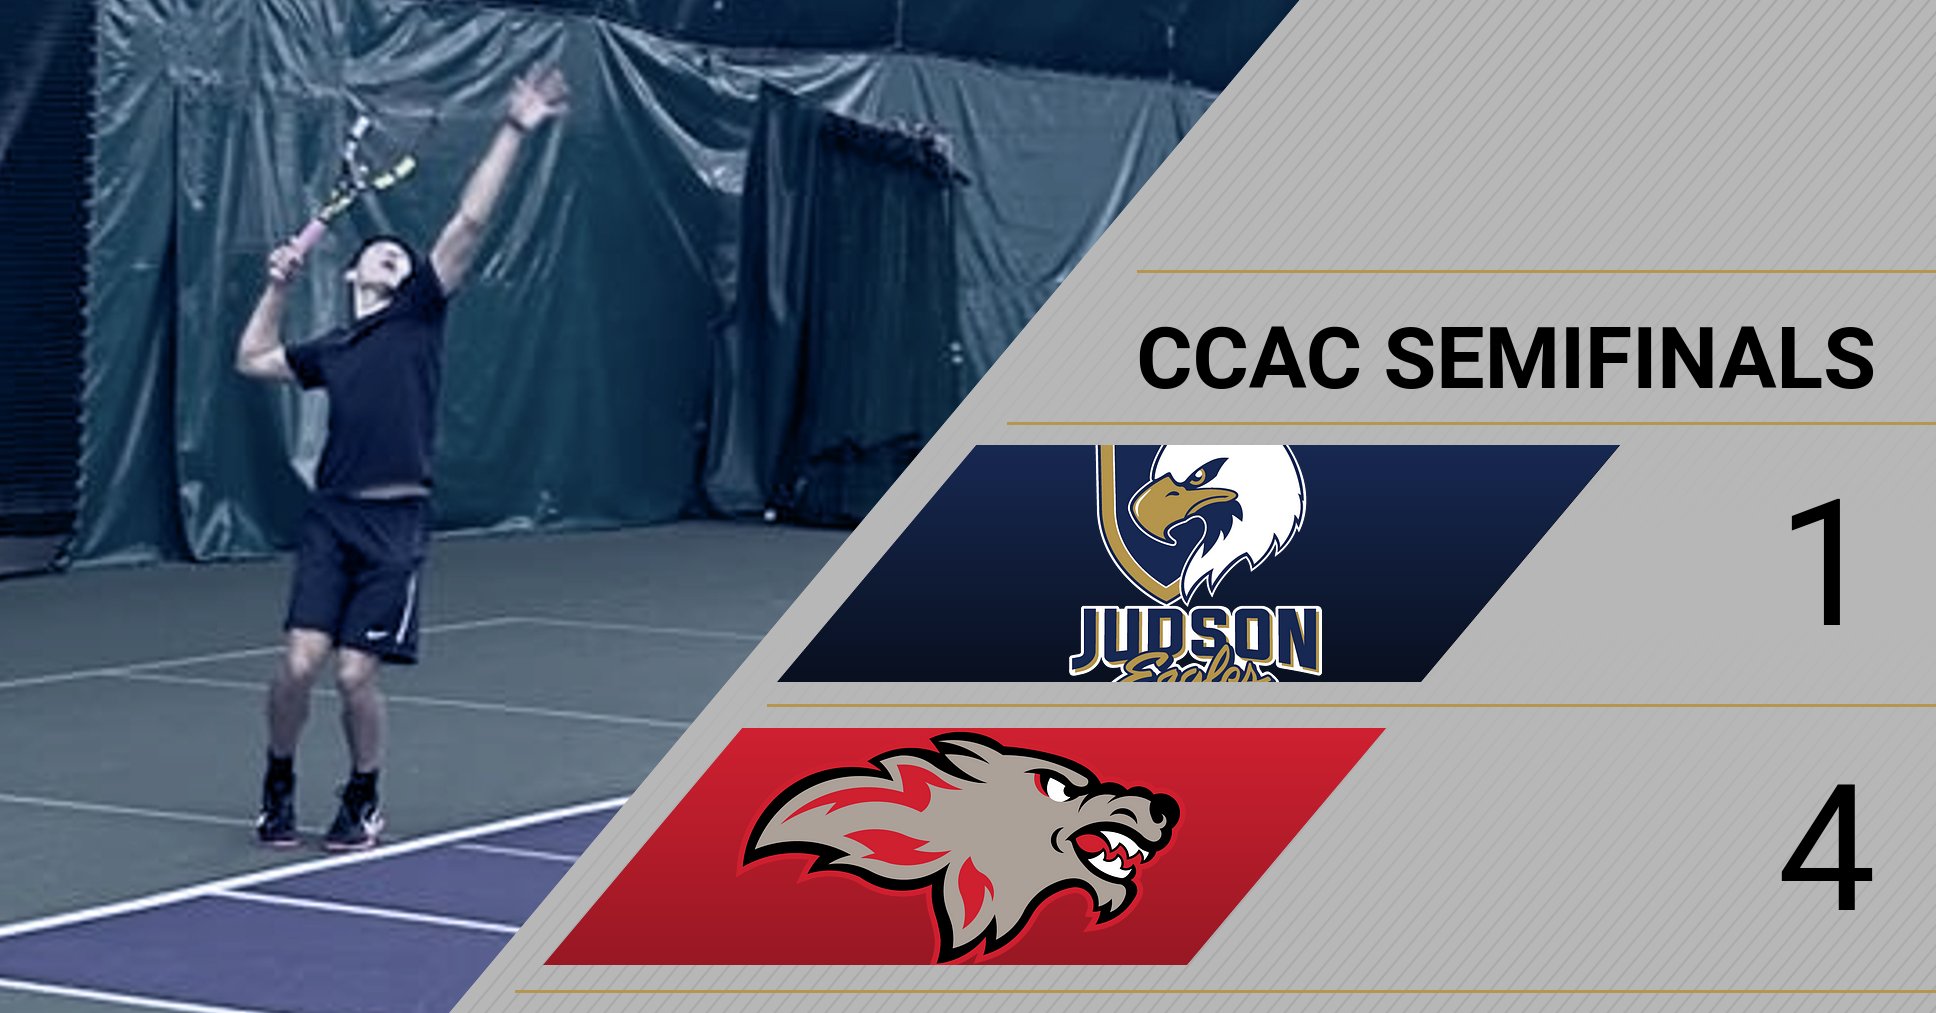 Judson Earns Doubles Point in 4-1 Loss to Cardinal Stritch in CCAC Semifinals